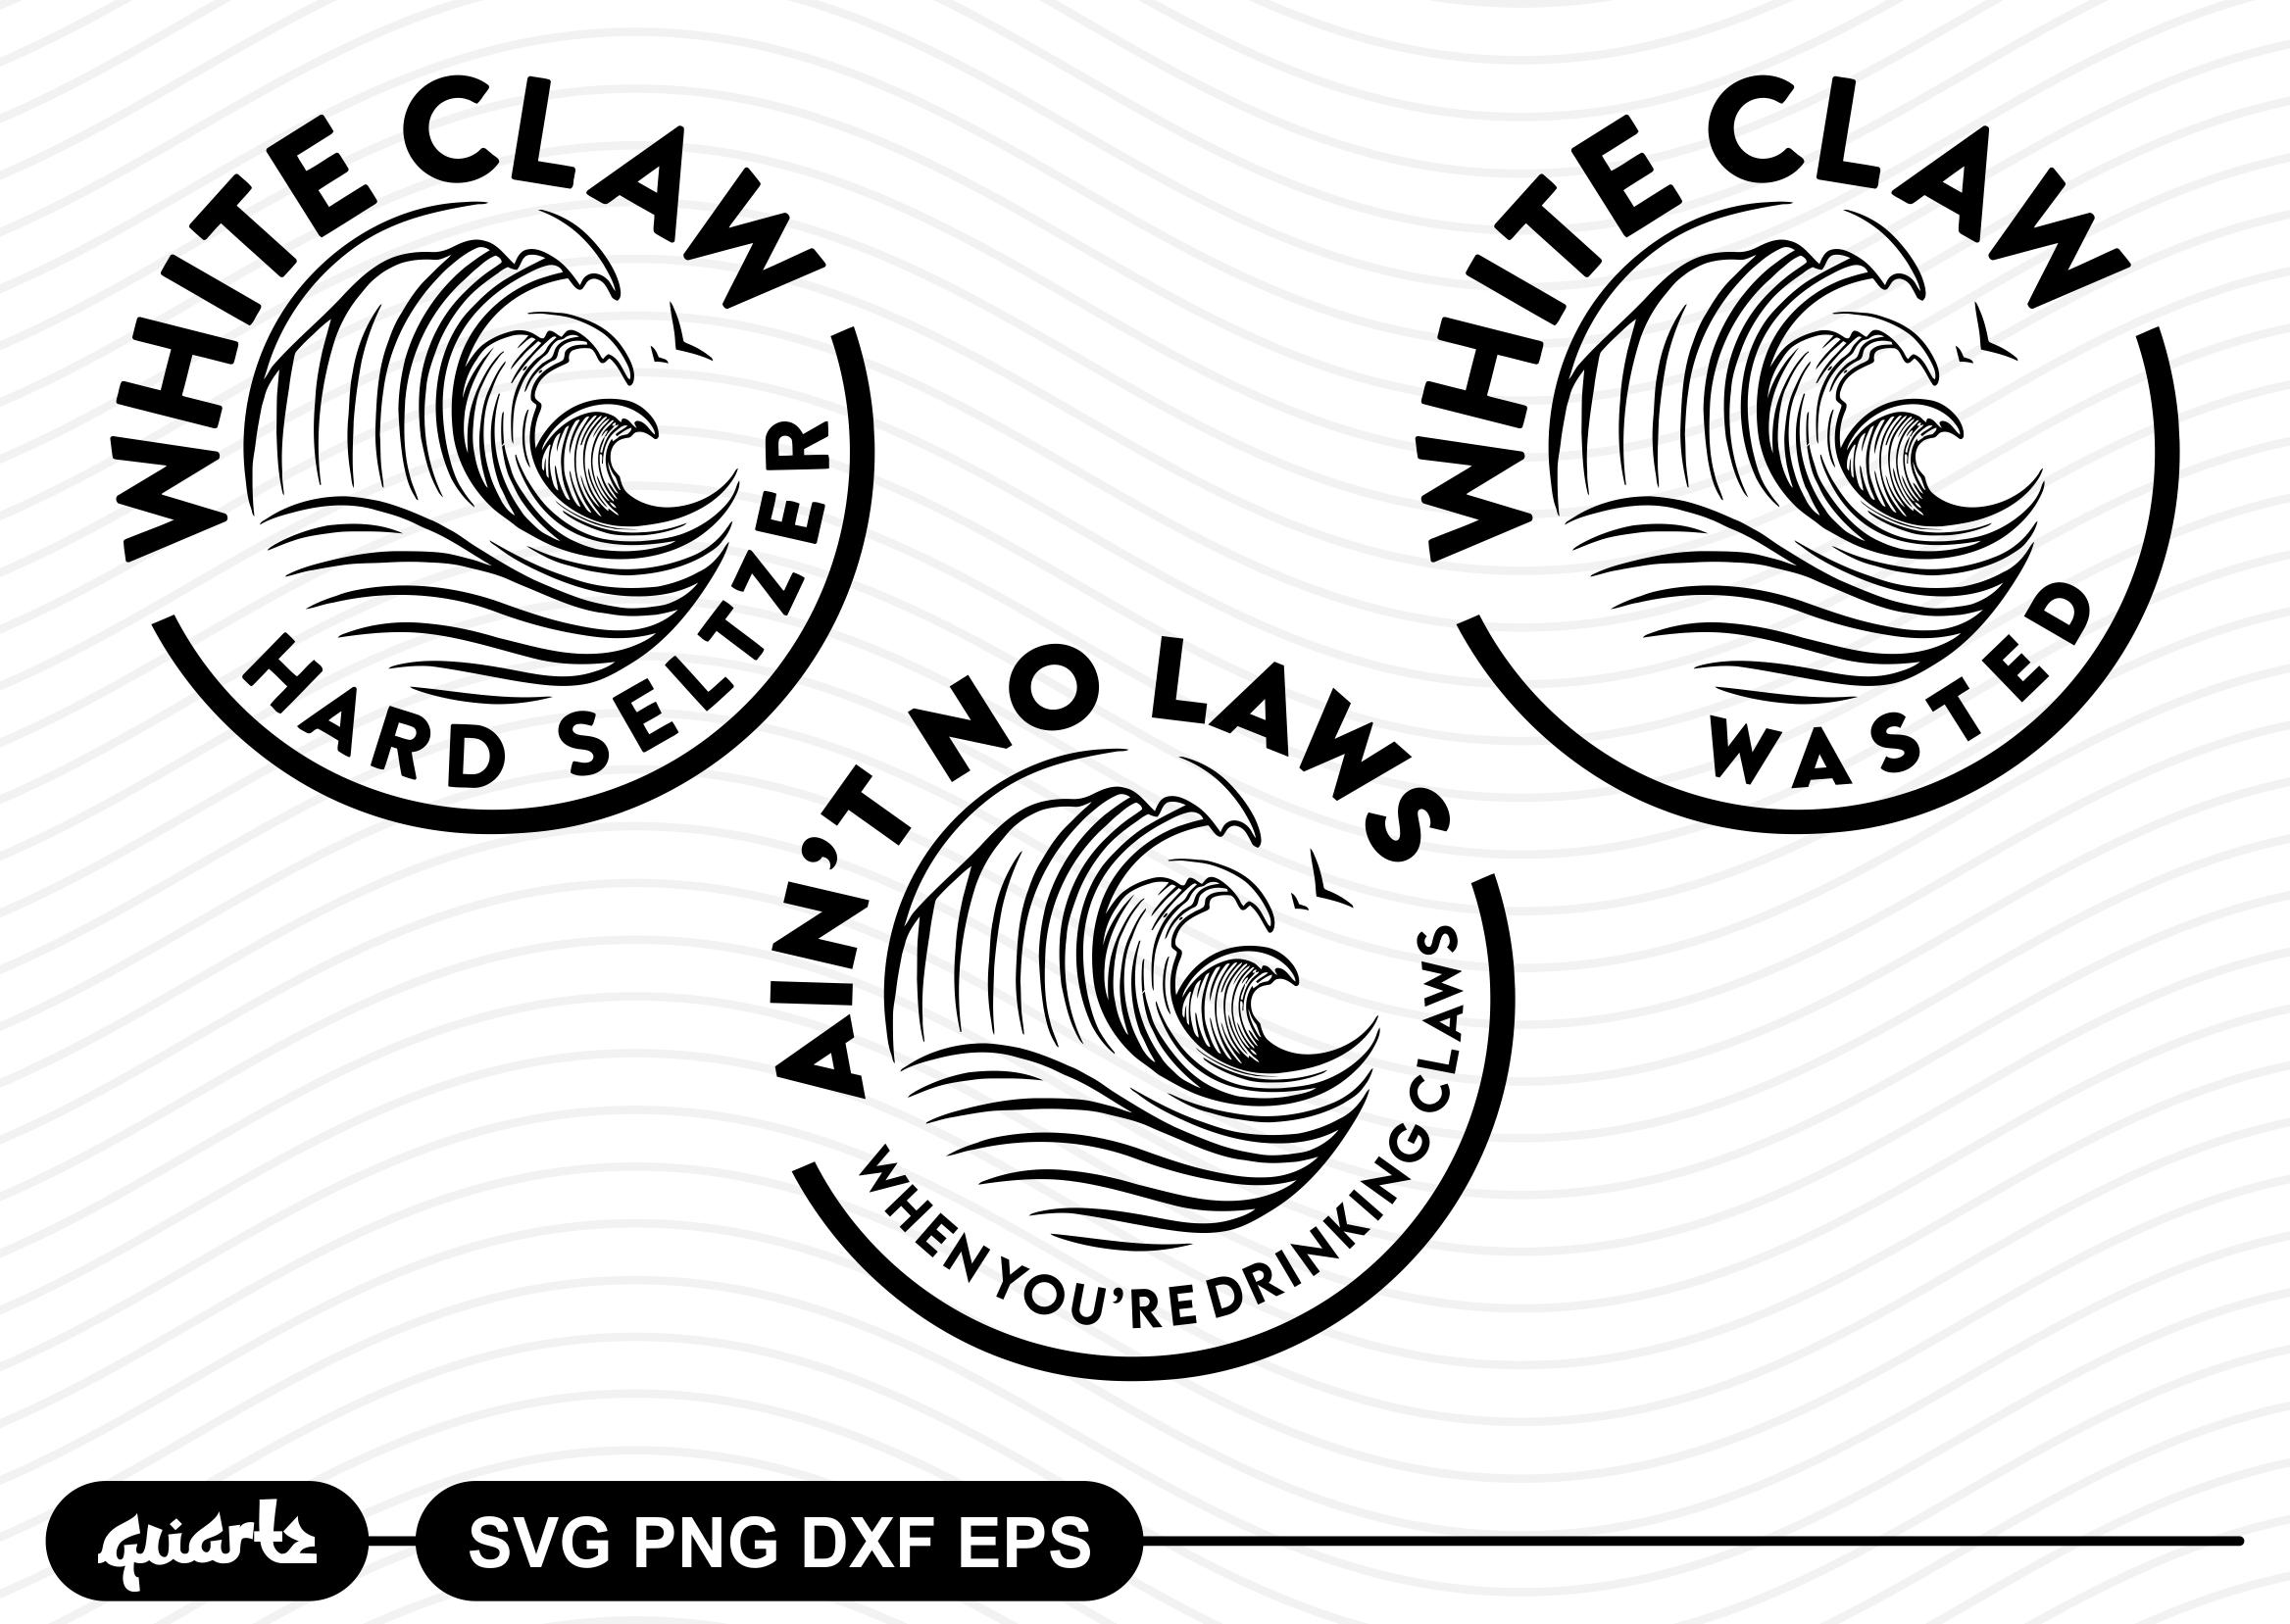 Claw Holding SVG